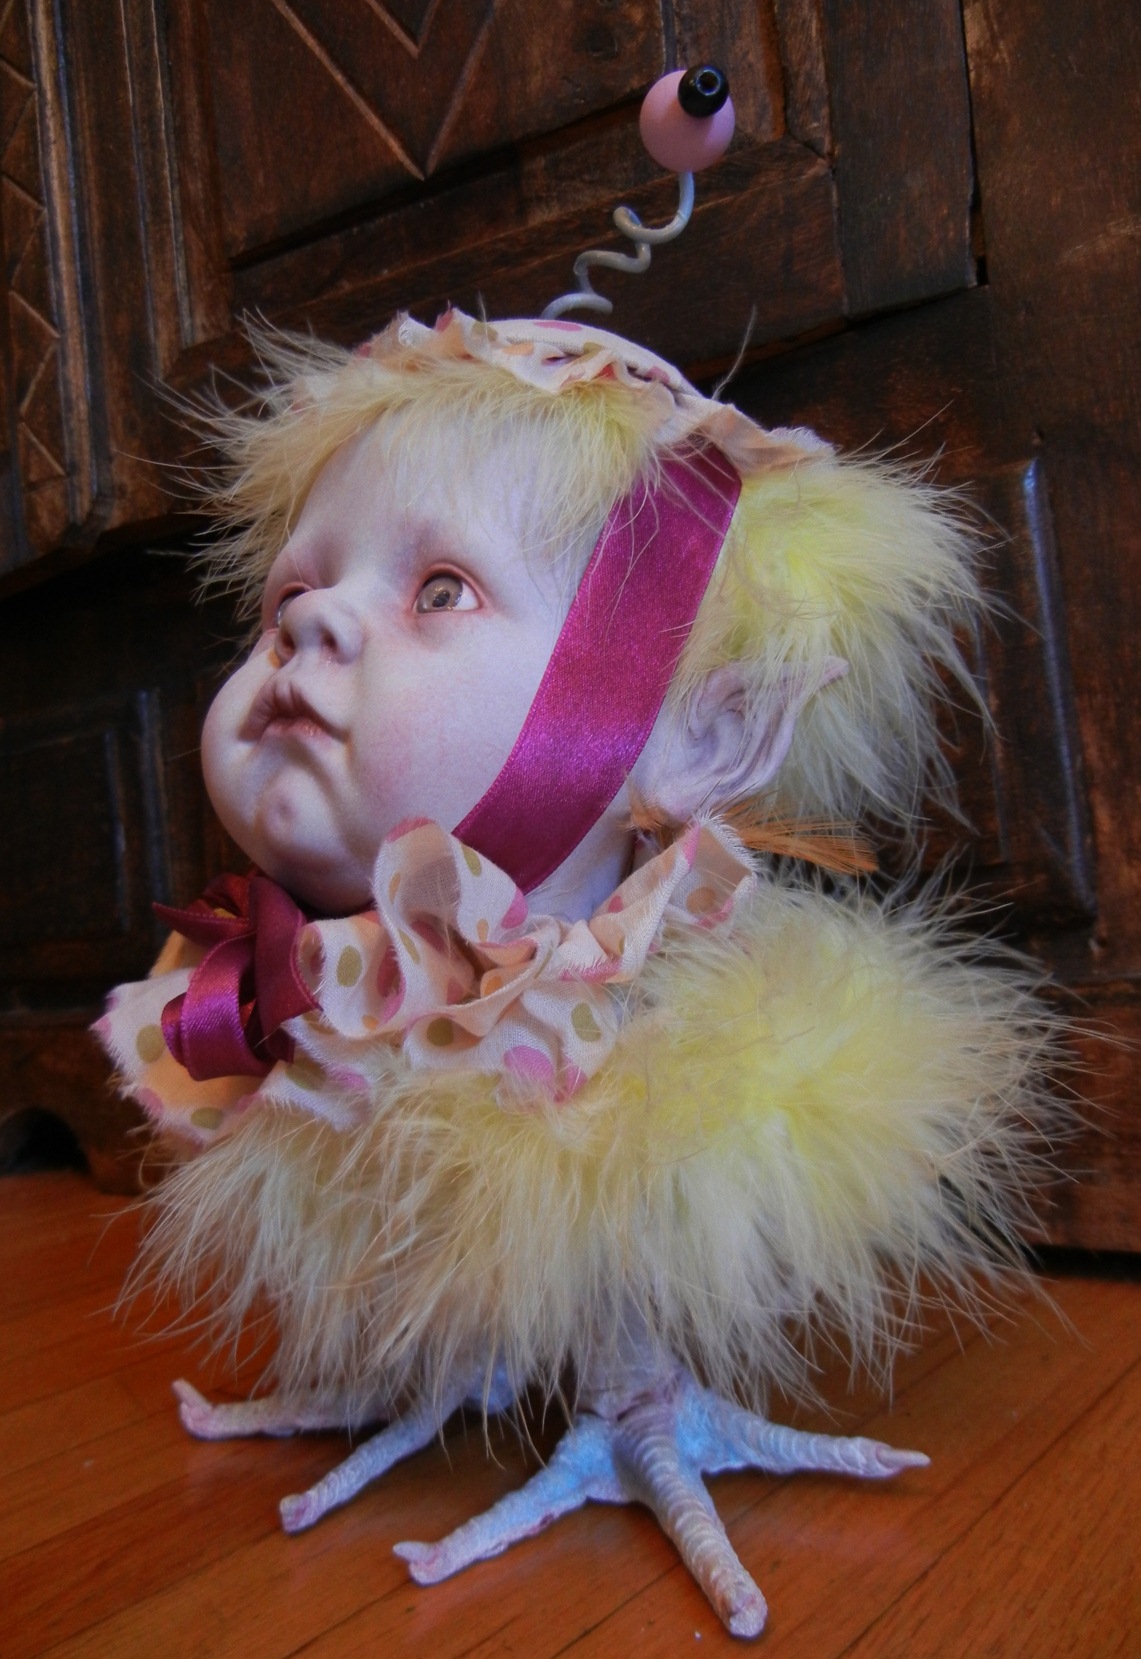 gothic repainted porcelain babydoll head, polka-dot cap and ruff, yellow feathered bird body with taxidermy birdfeet